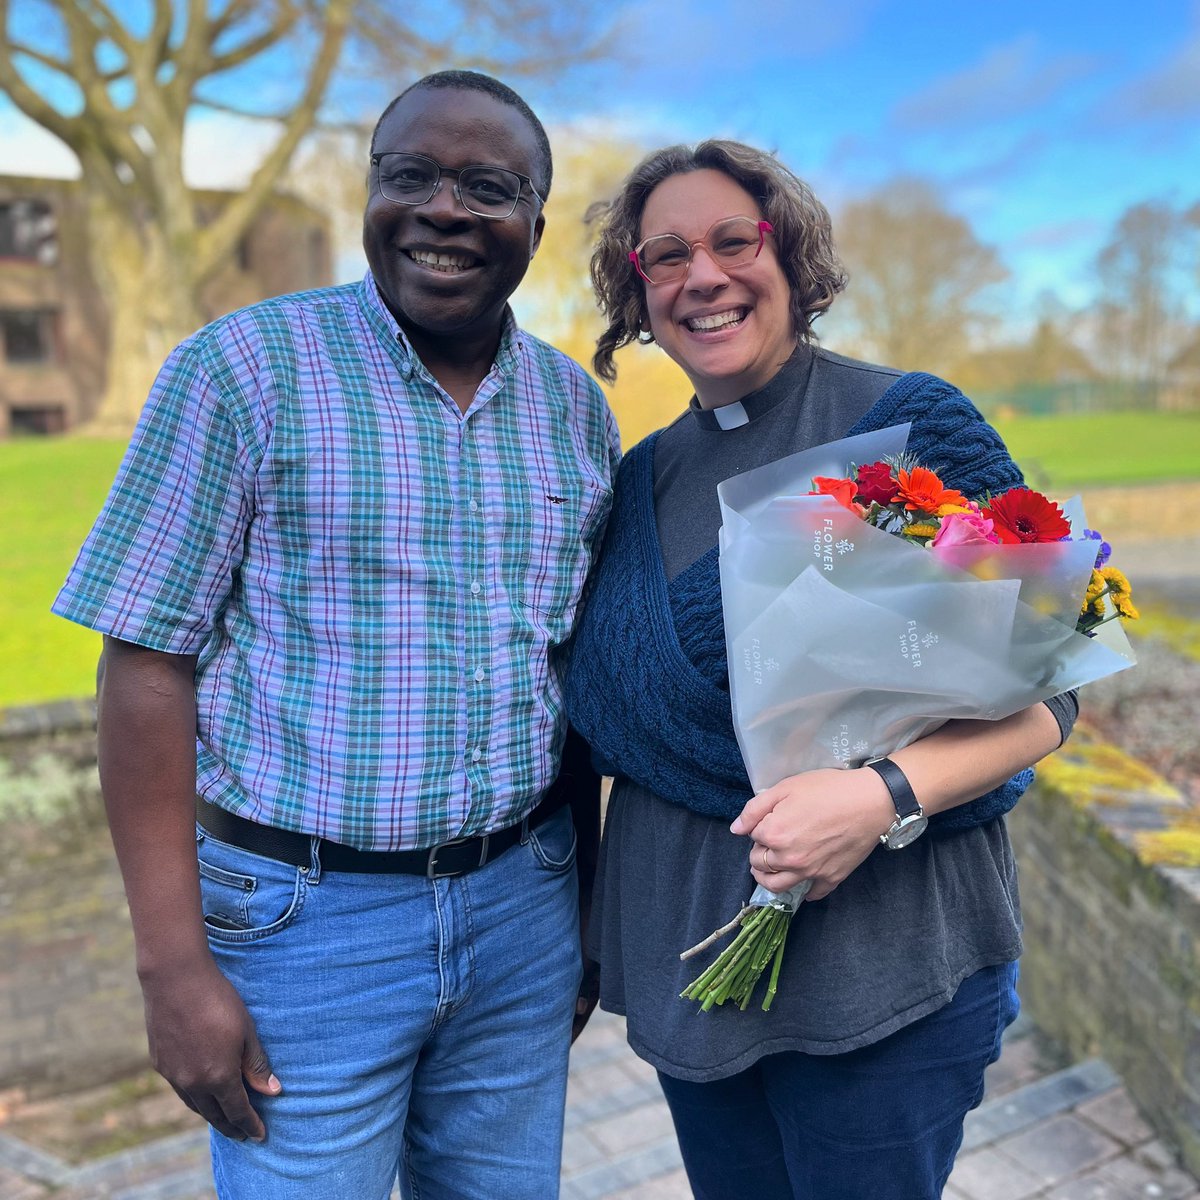 Today, we say farewell to Rebecca, our Hill Colleges Chaplain, who is leaving us for a new role. We would like to thank Rebecca for her many contributions to the @trevscollege community as our chaplain and send our best wishes for the future! #TrevelyanCollege #explore #community